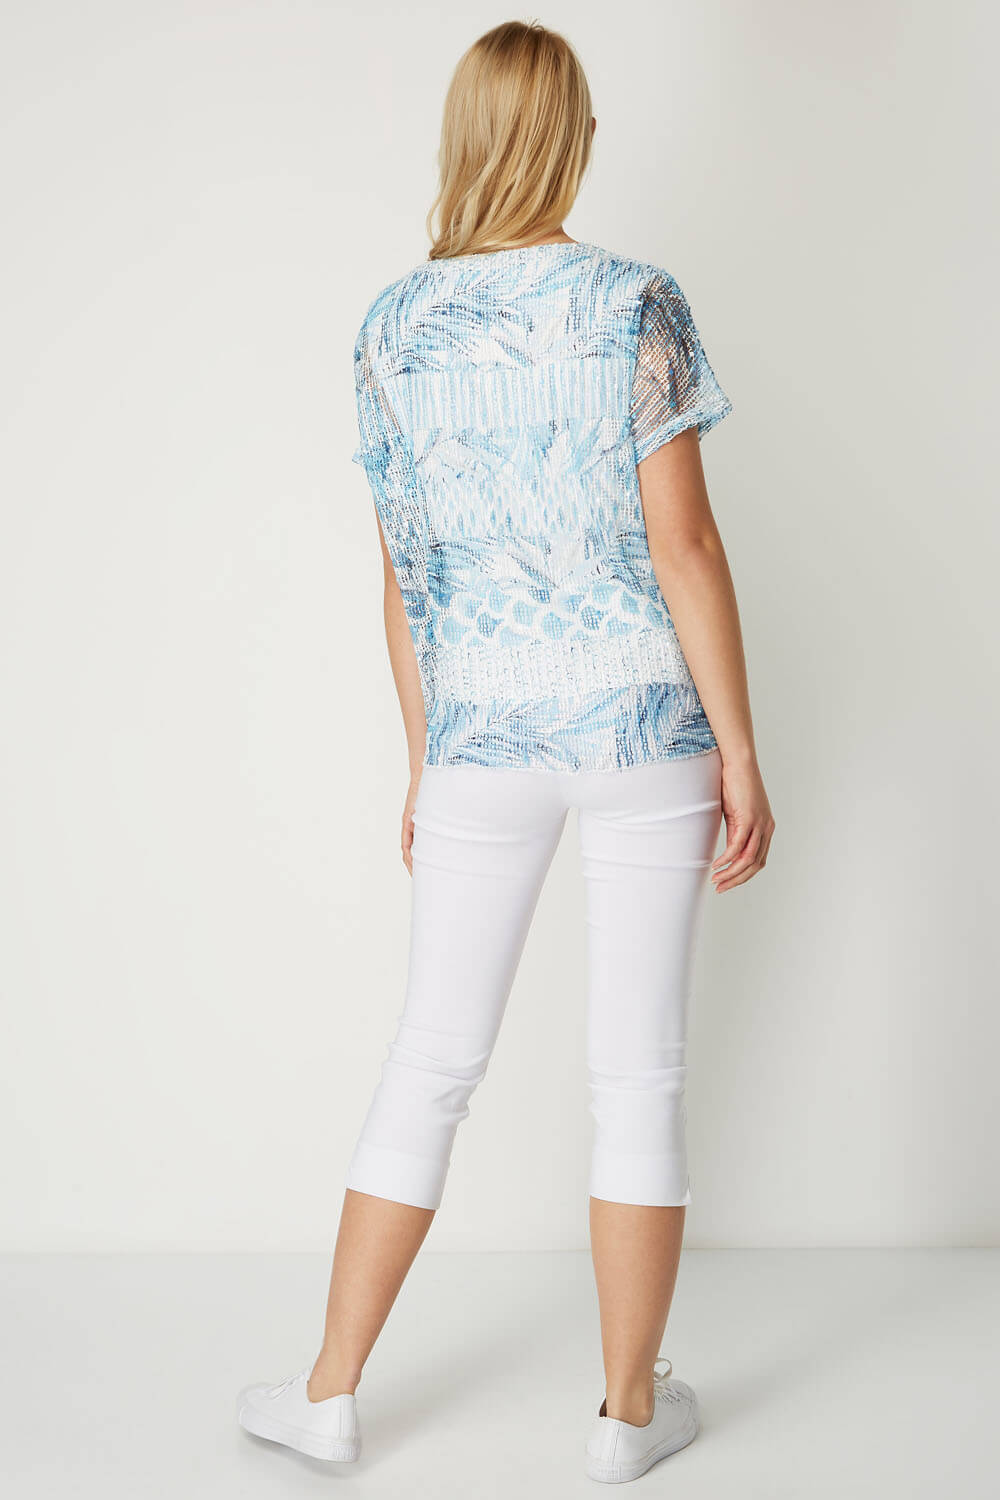 Blue Tropical Print Net Overlay Top, Image 2 of 8